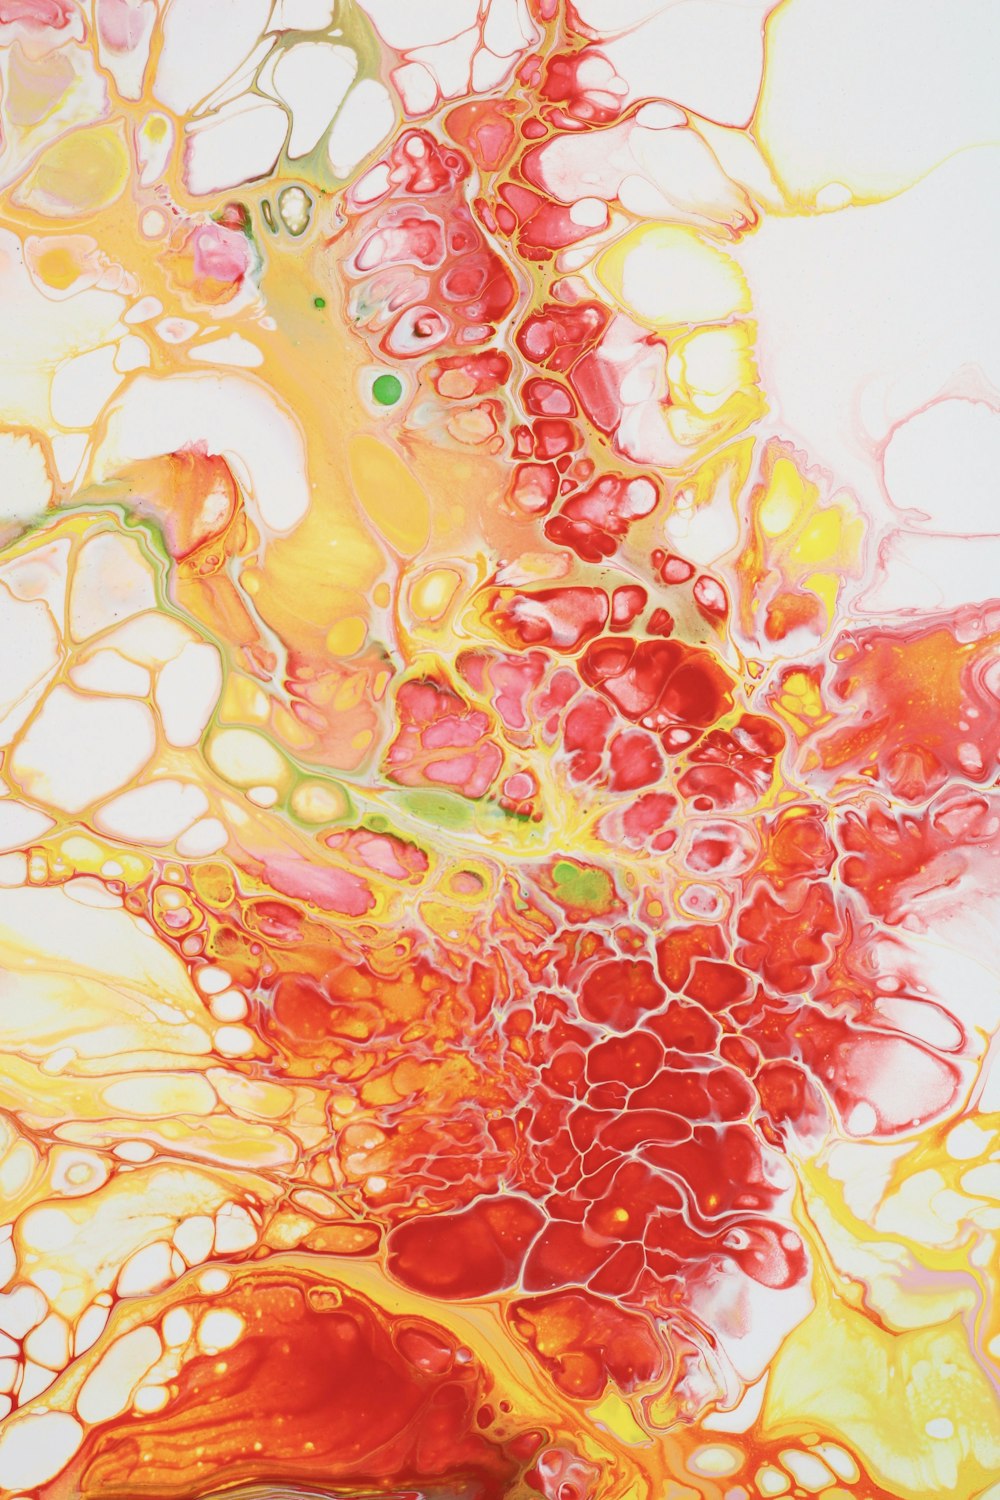 an abstract painting with red, yellow, and green colors